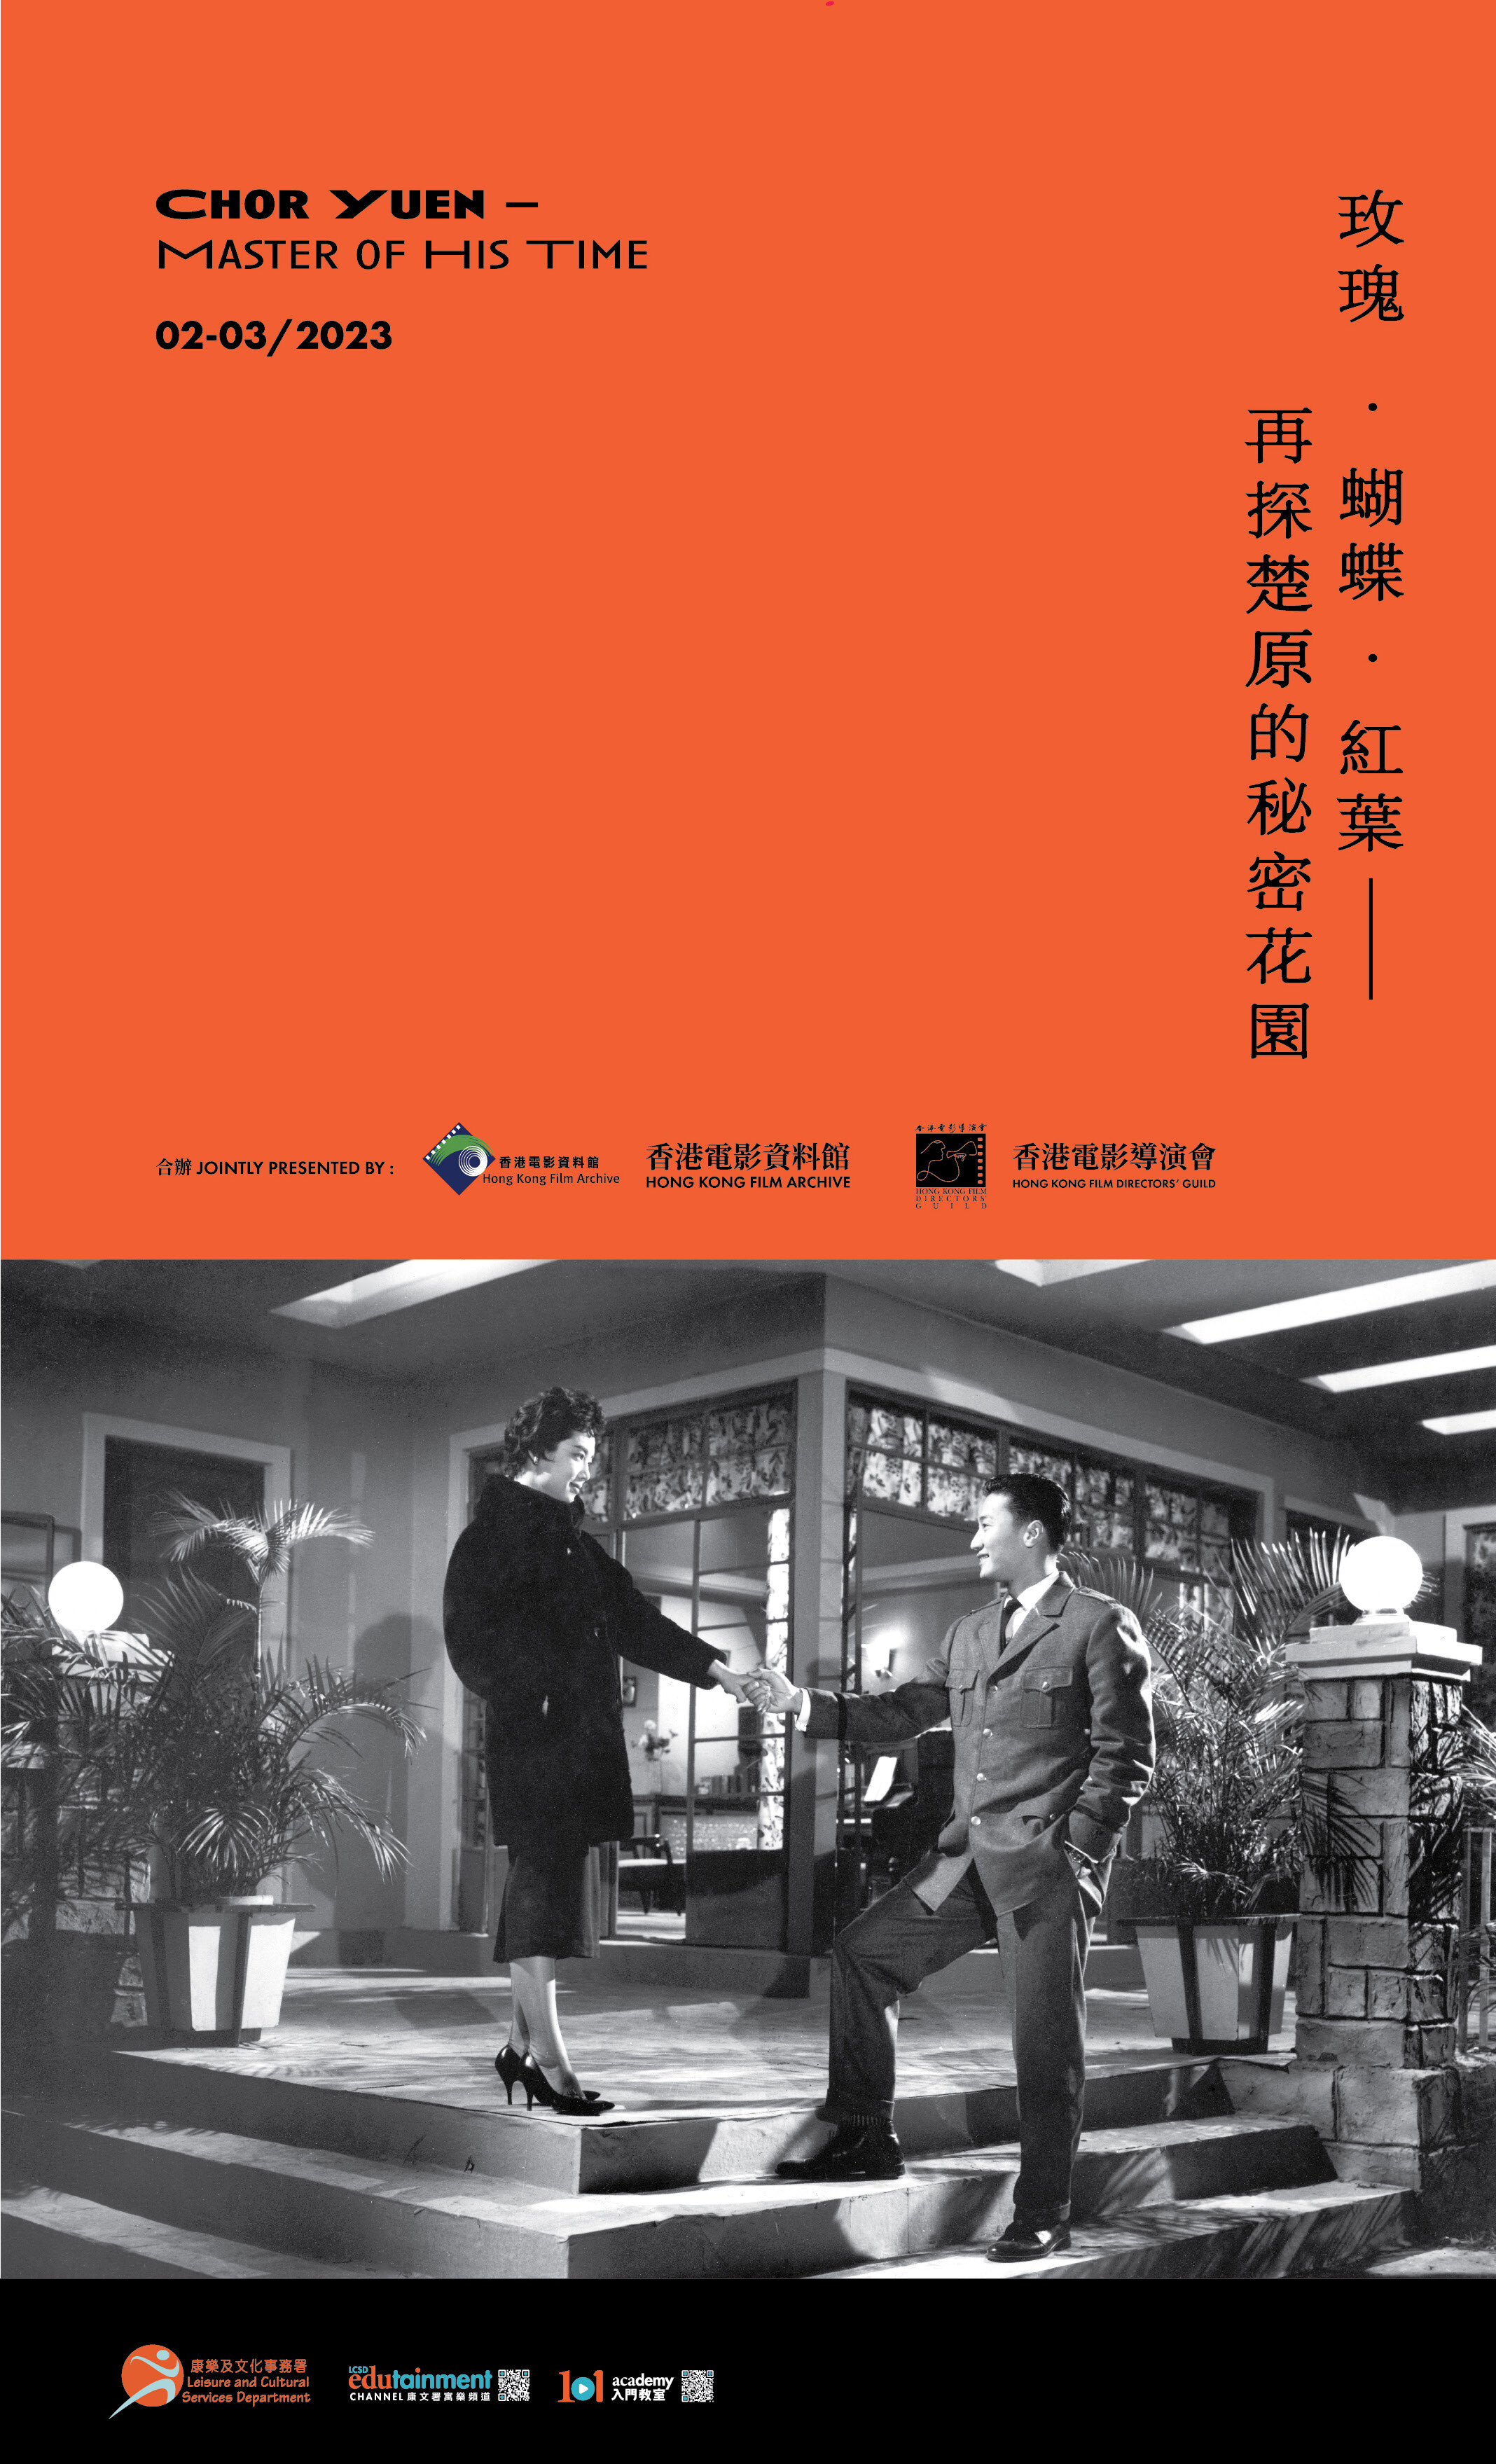 Chor Yuen – Master of His Time (PDF format, about 8.22MB)